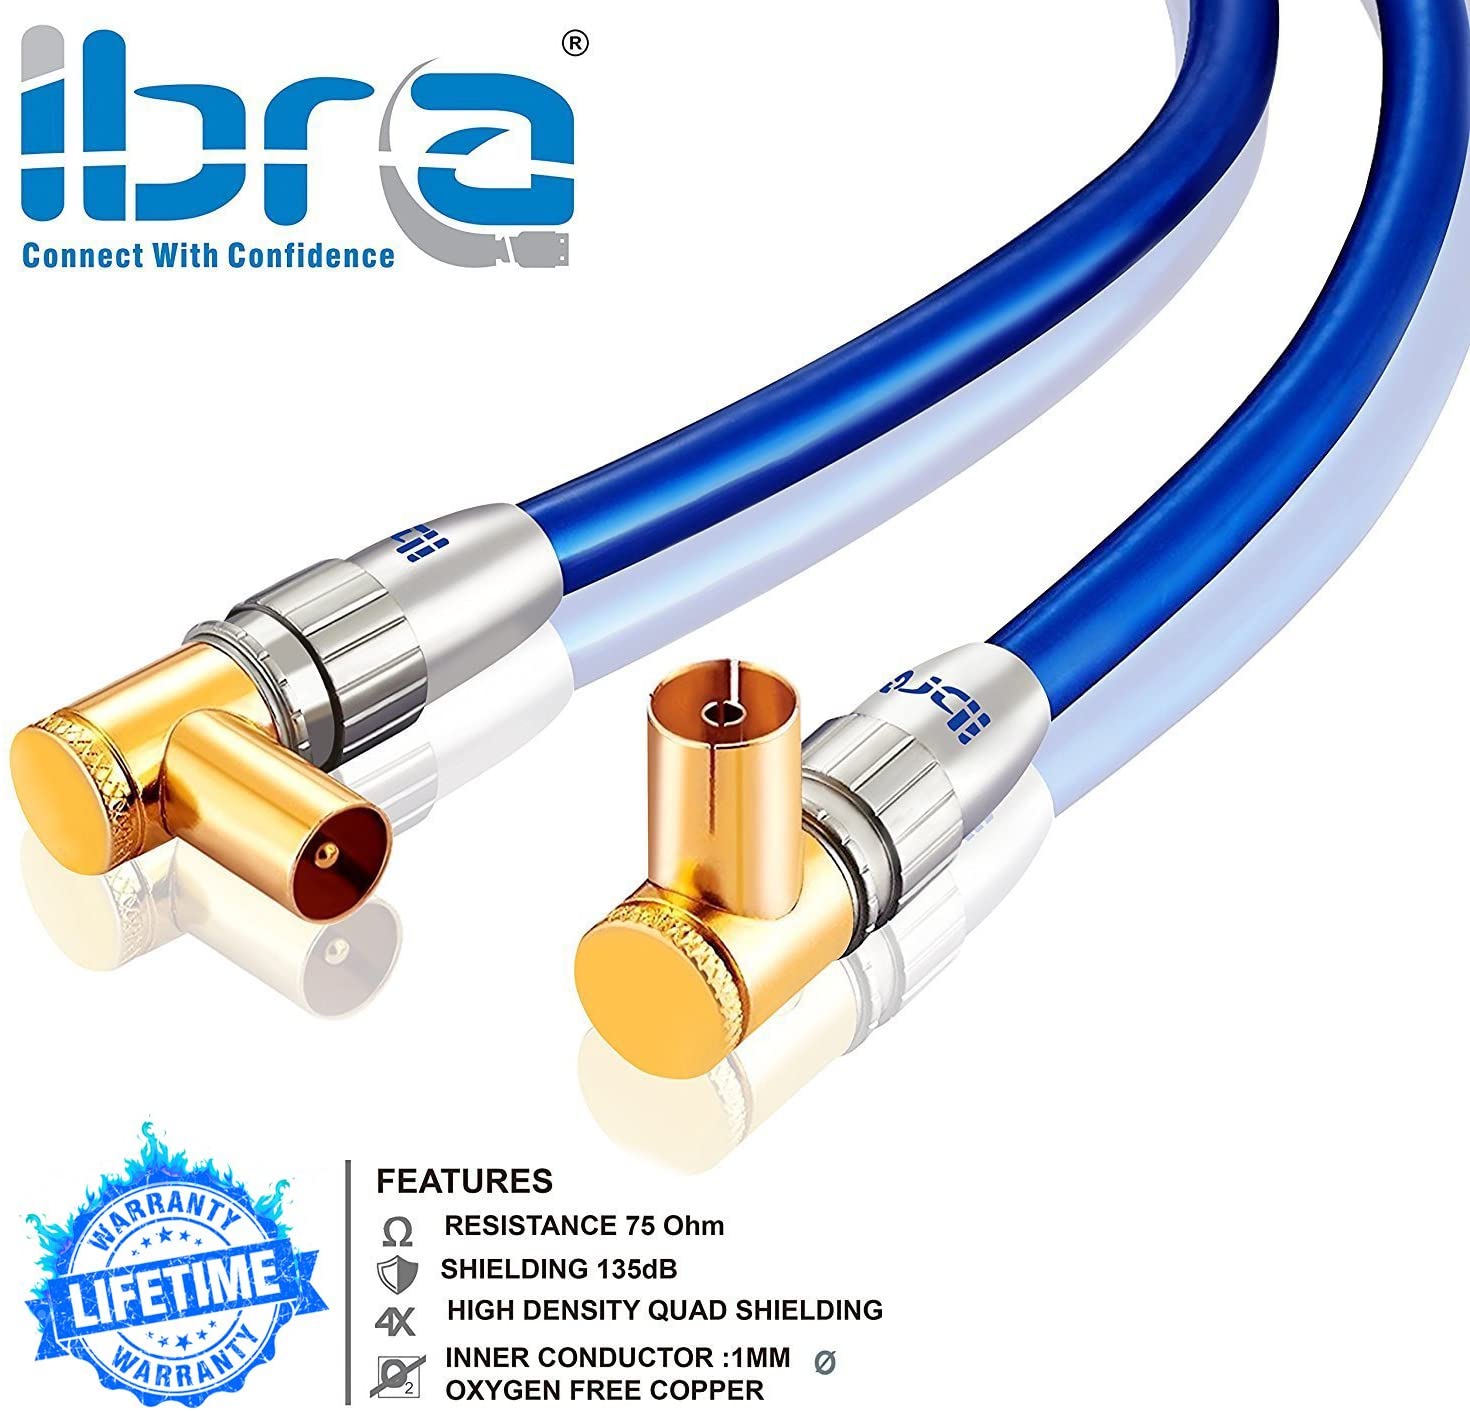 2m IBRA HDTV Antenna Cable | TV Aerial Cable with 90 Degree Right Angled Connectors | Premium Freeview Coaxial Cable | 90° Angled Connectors: Coax Male to Female |For UHV/UHF/RF DVB-T1/T2